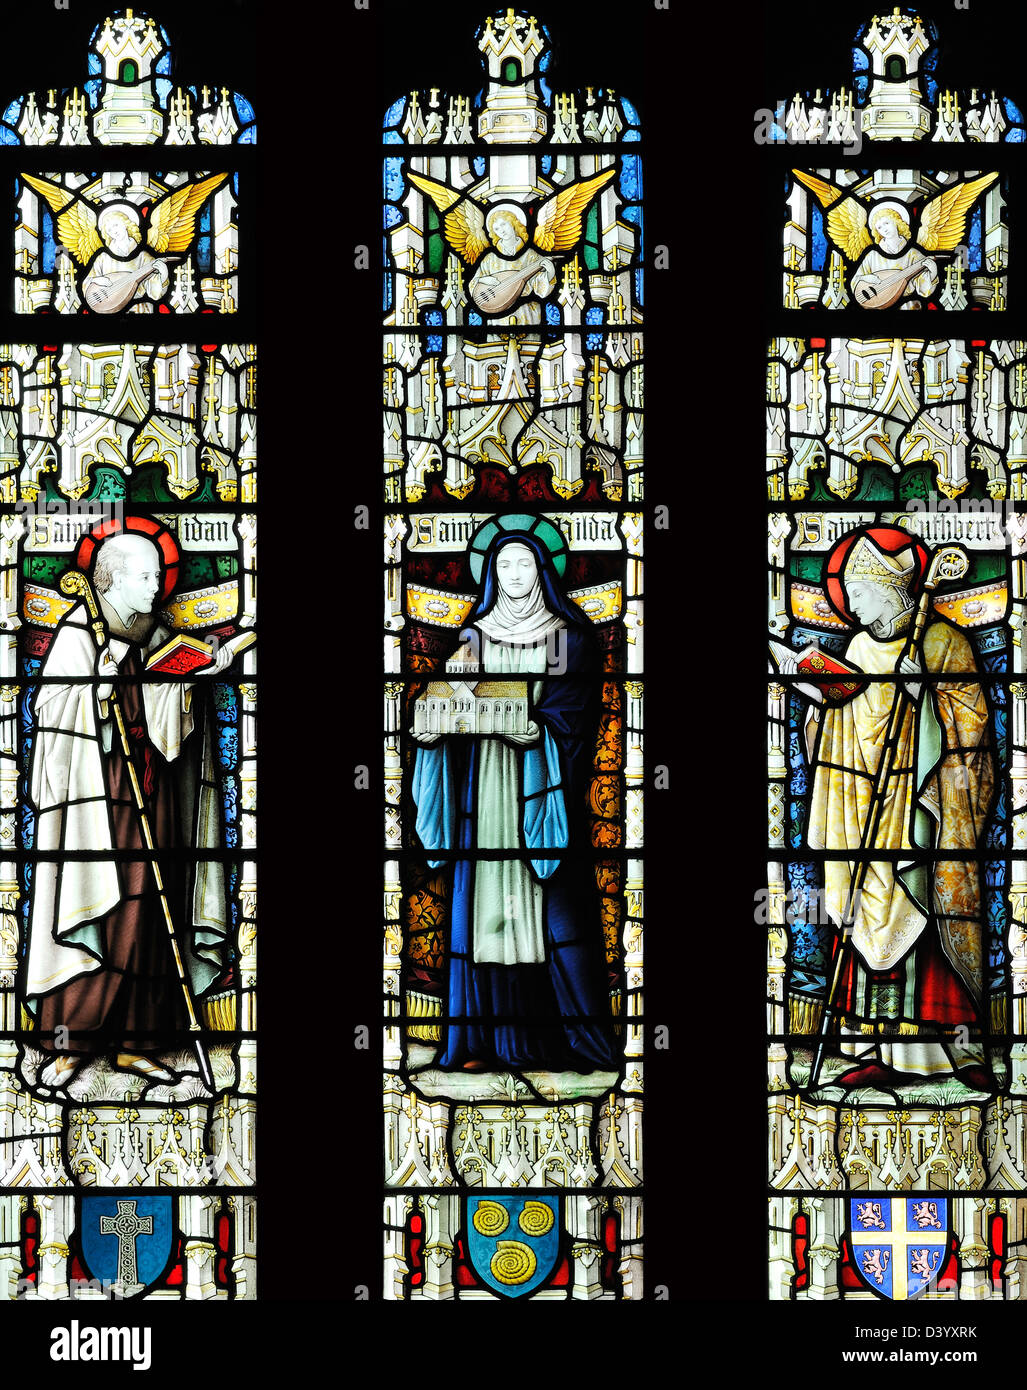 Stained glass window depicting Saints from the North East of England, the Parish Church of the Holy Trinity, Skipton, Yorkshire Stock Photo